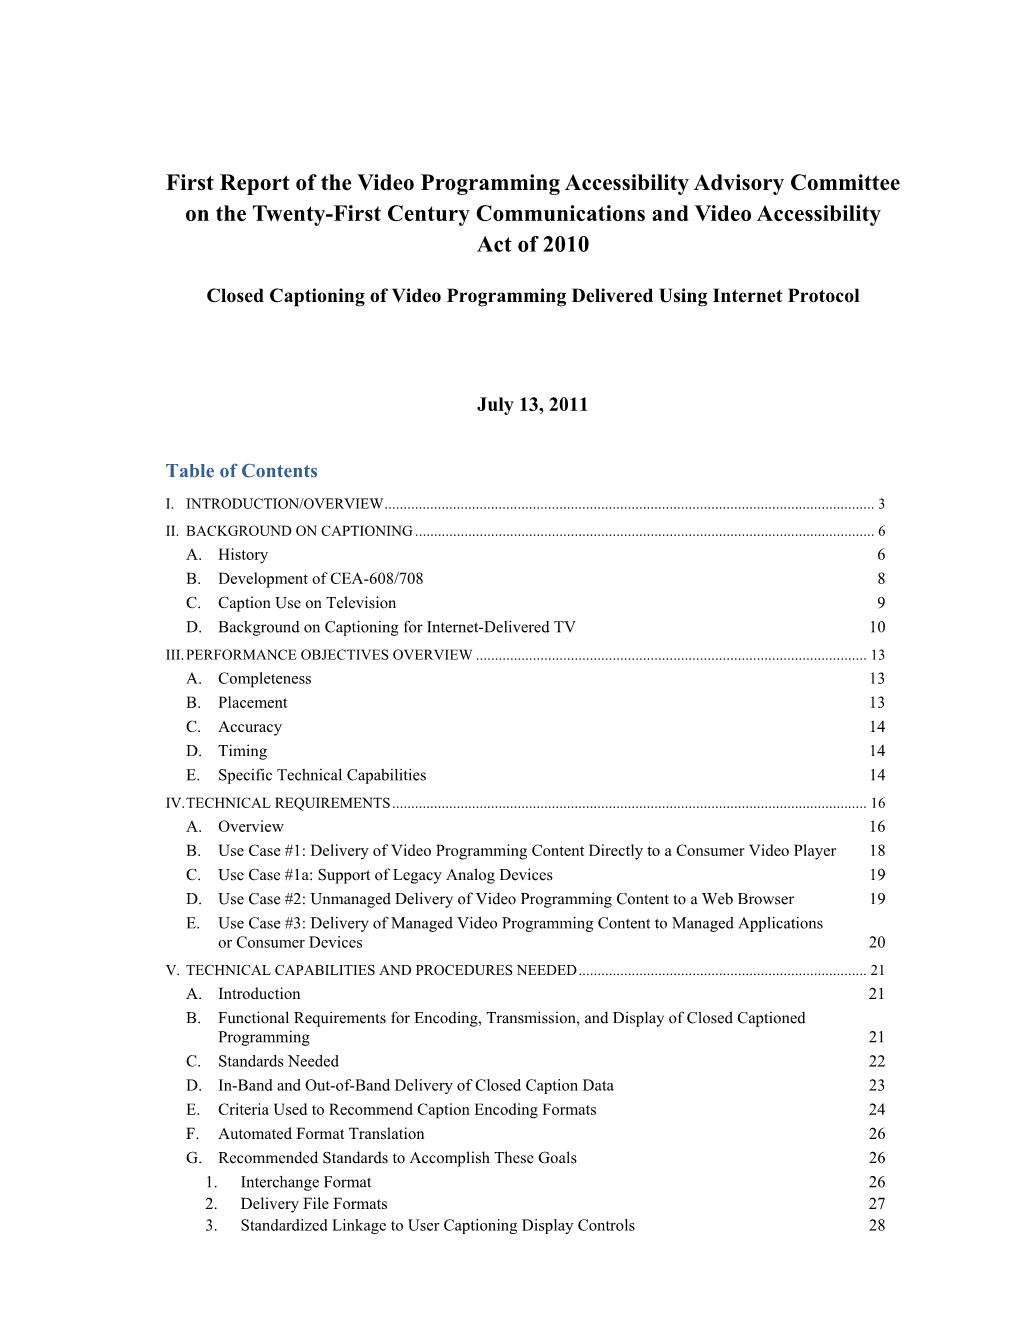 First Report of the Video Programming Accessibility Advisory Committee on the Twenty-First Century Communications and Video Accessibility Act of 2010